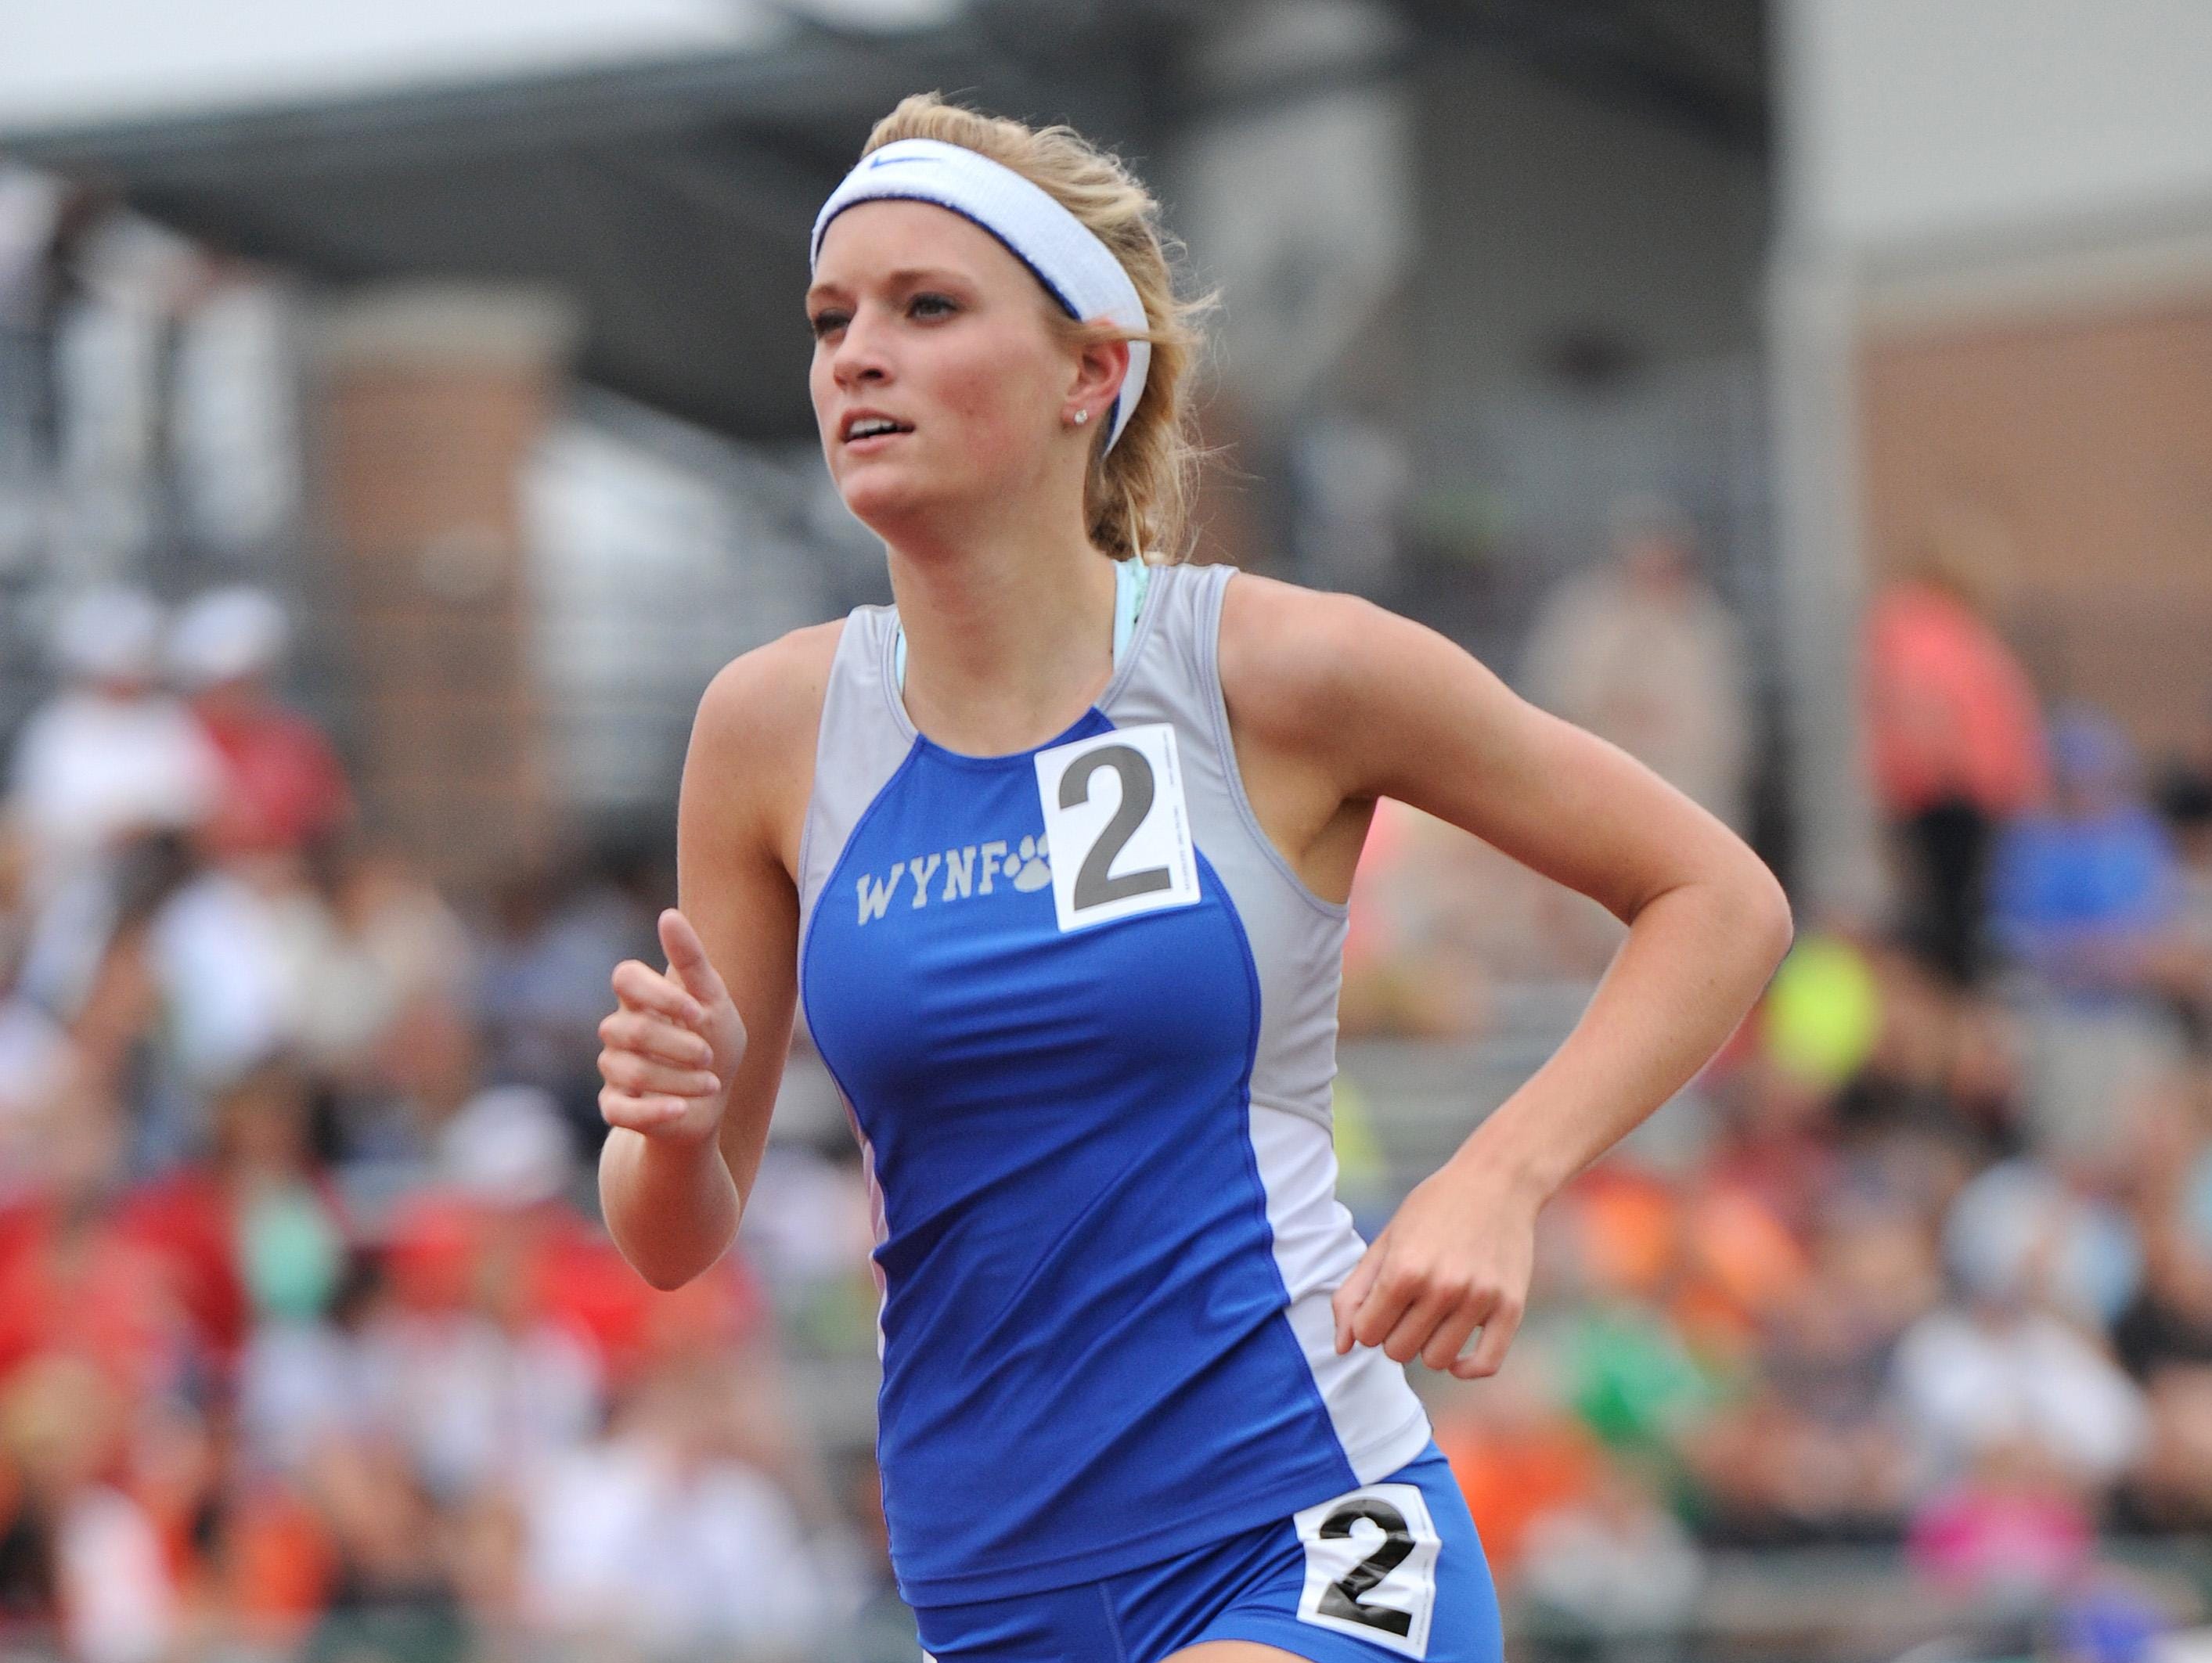 Wynford’s Ellie Richmond competes in the 1,600 meter run at the state track meet, earning a sixth-place medal.